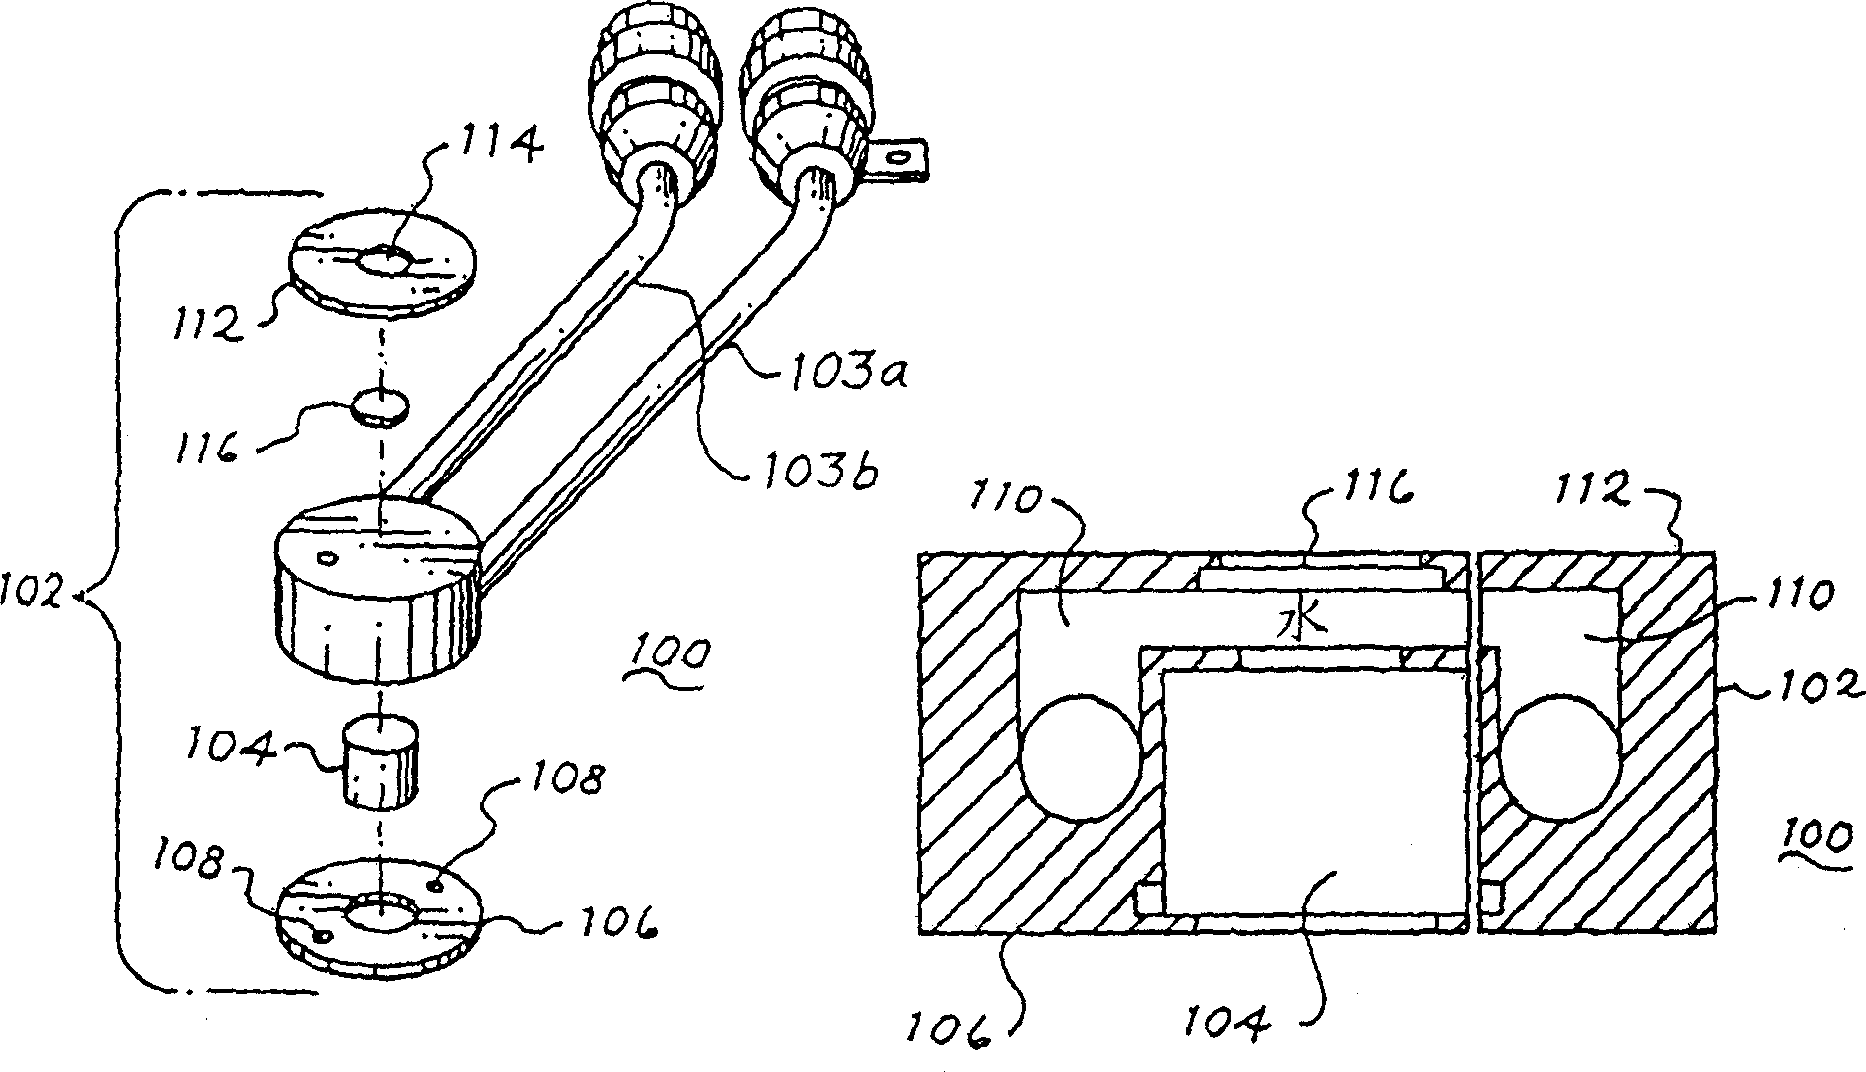 Tungsten composite X-ray target assembly for radioactive treatment